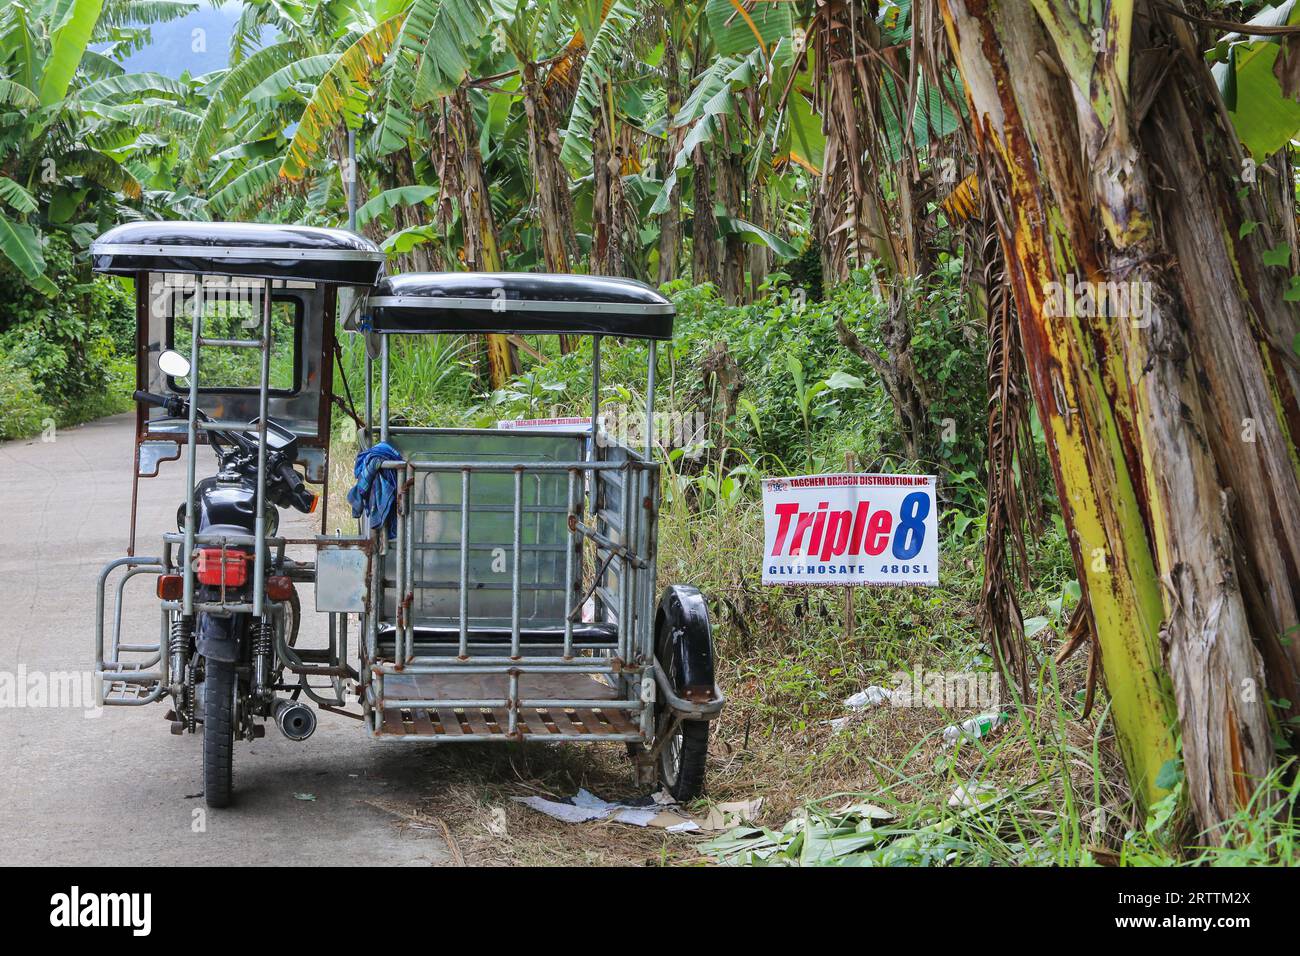 Advertising sign for glyphosate herbicide Triple 8 480SL (Tag Chem) used in the nearby banana plantation farm, boxtype sidecar tricycle, Philippines Stock Photo